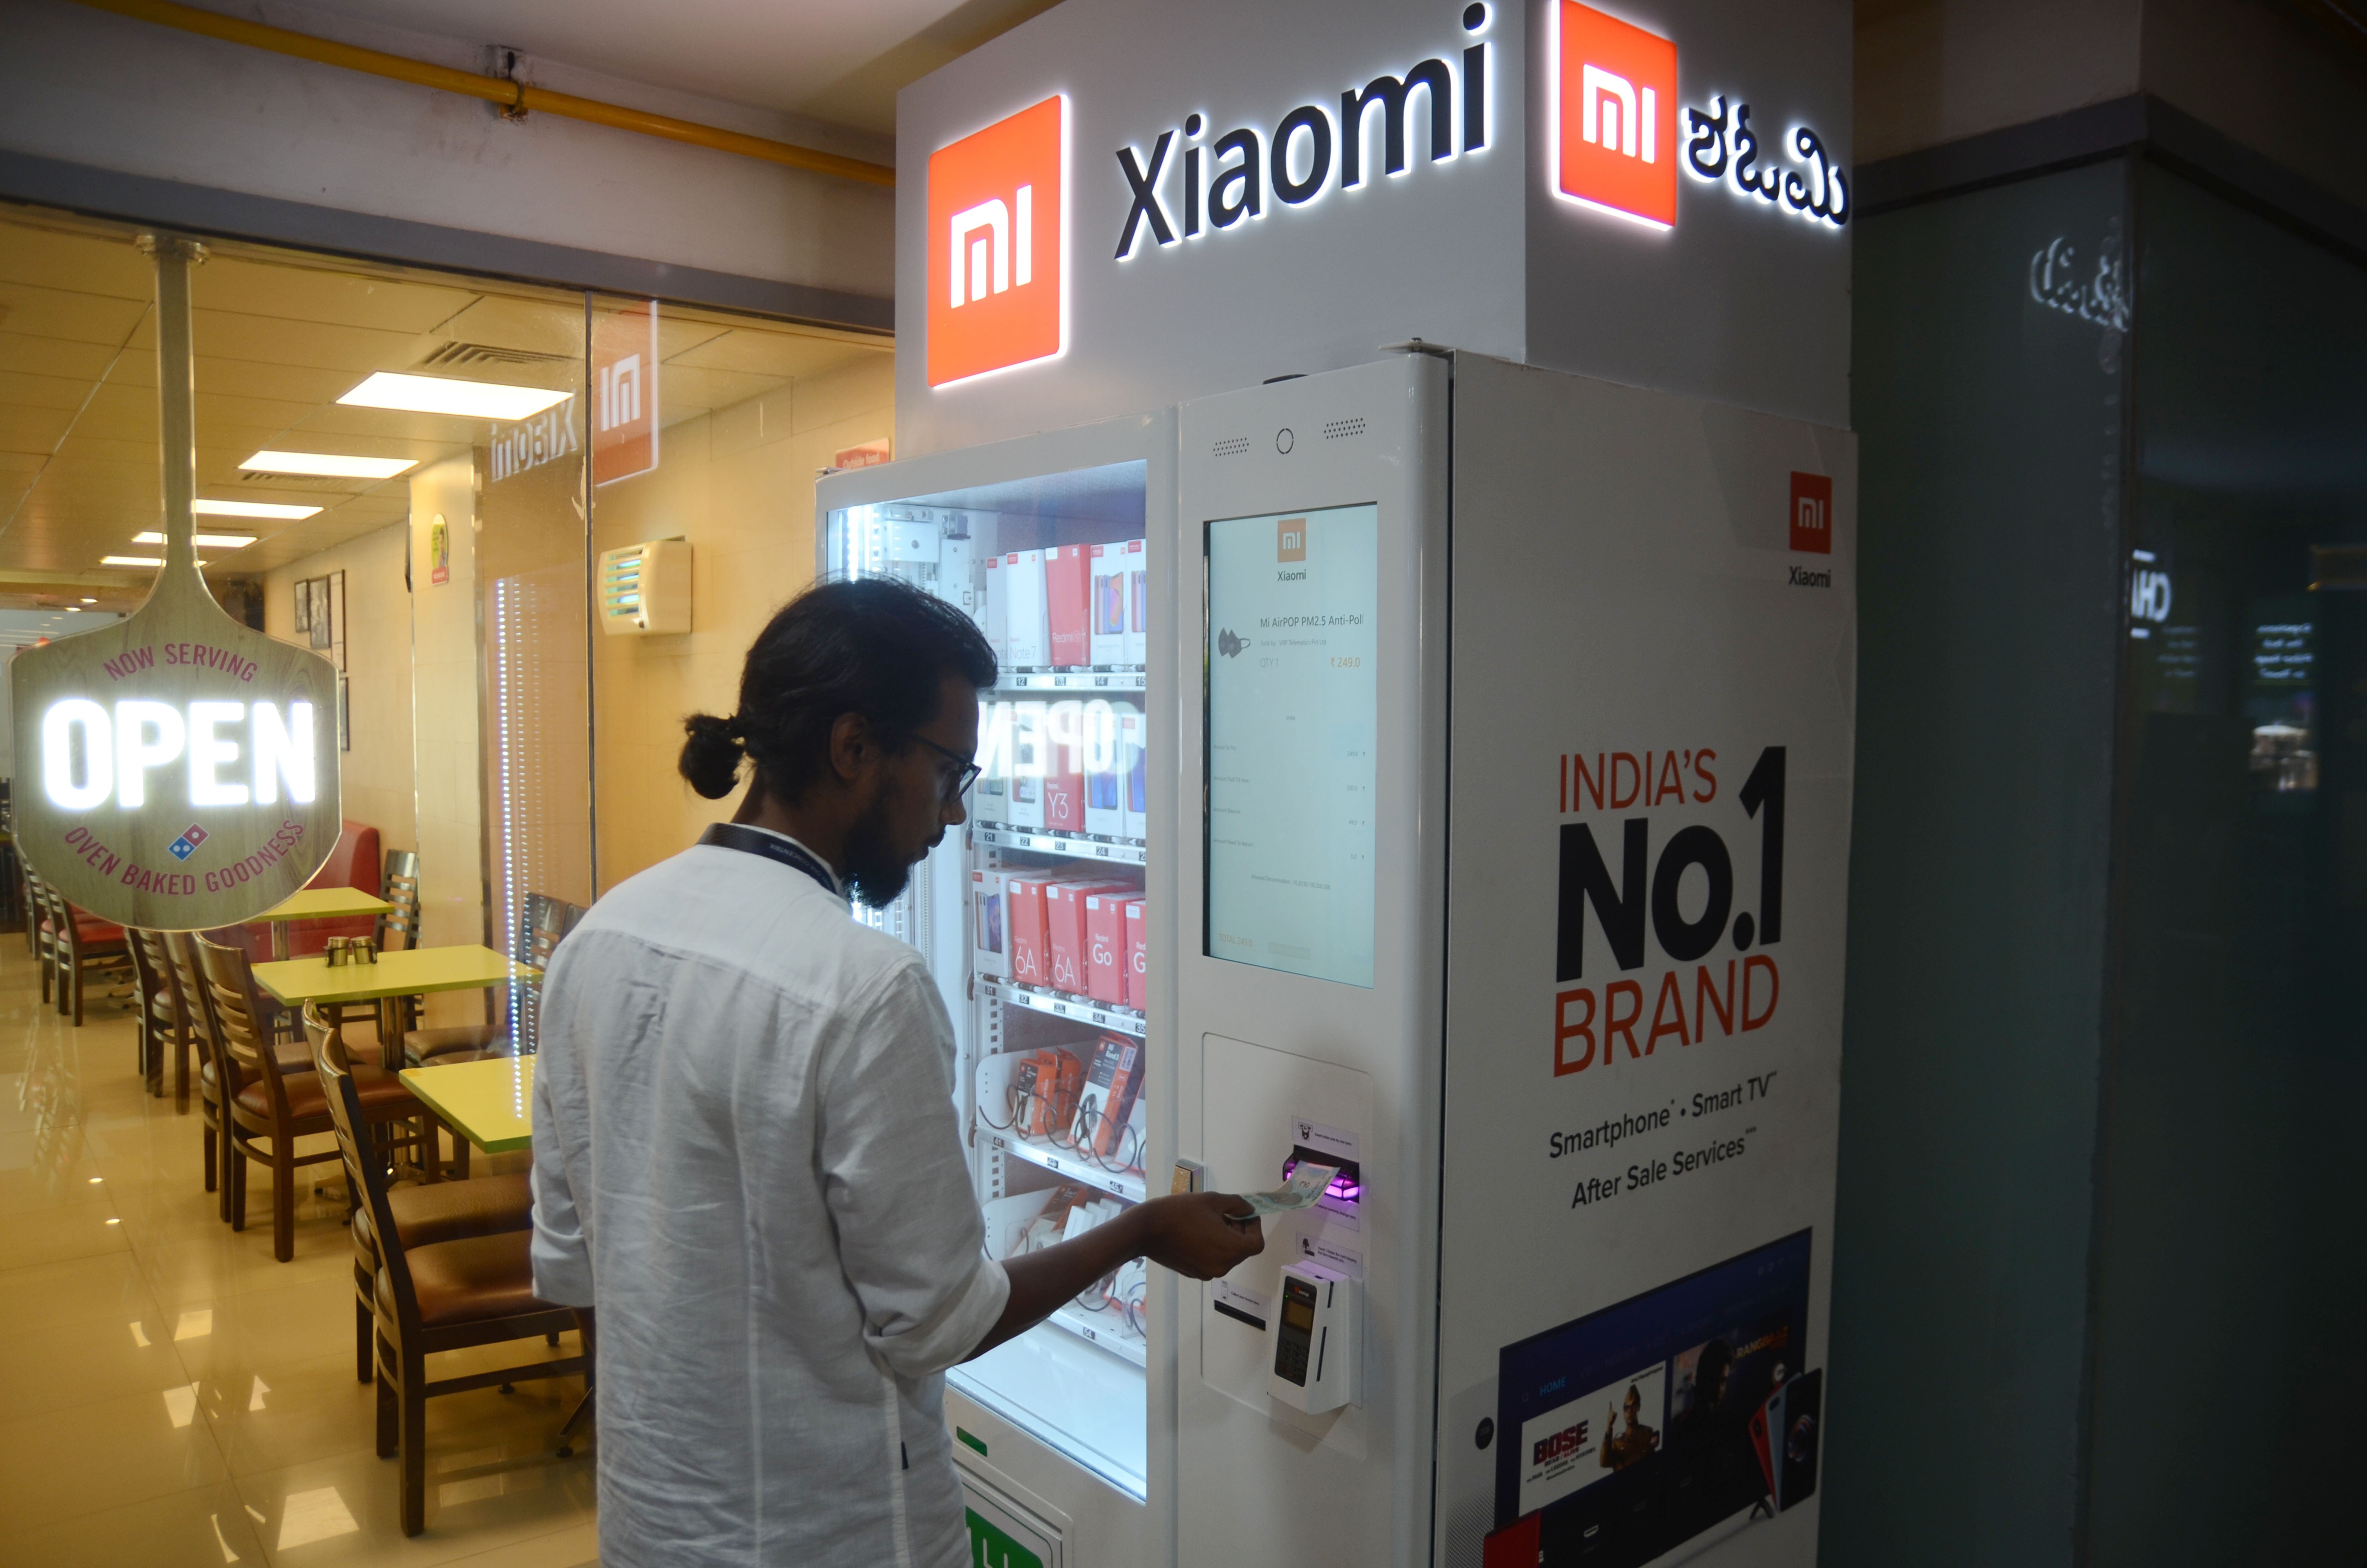 A purchaser uses the first Mi Express Kiosk, a Xiaomi vending machine, in Bangalore, India, on May 17, 2019. Xiaomi is India’s top smartphone maker, but sales of its handsets and those of other Chinese brands are threatened by new lockdowns amid surging Covid-19 cases in the country. Photo: Xinhua